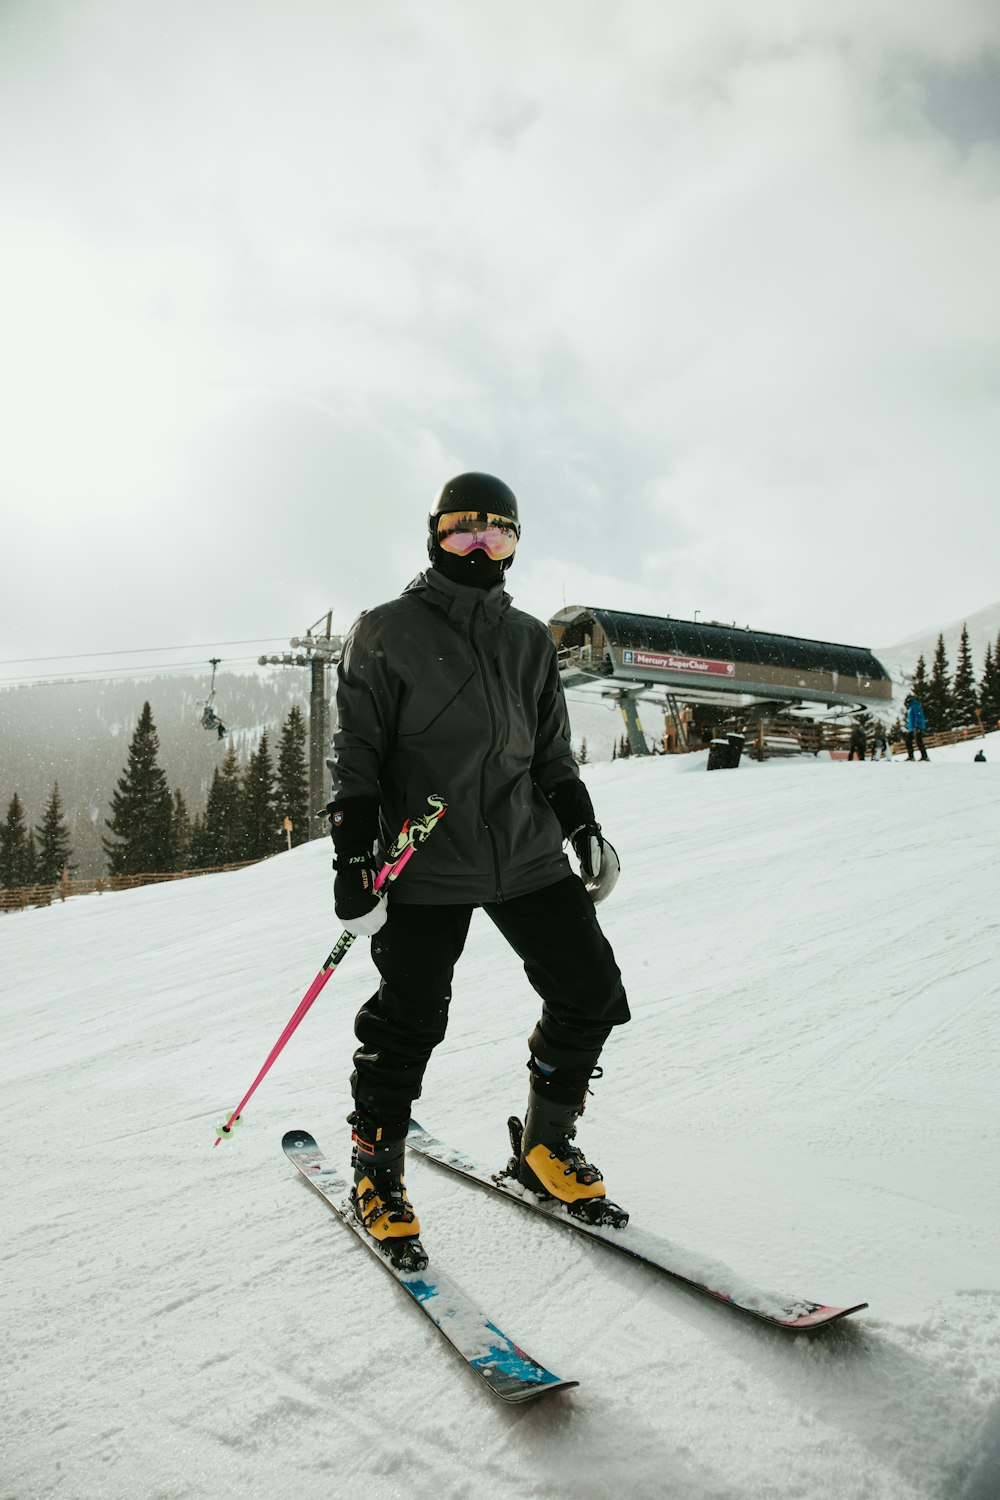 man in black jacket and black pants riding on red and white ski blades on snow